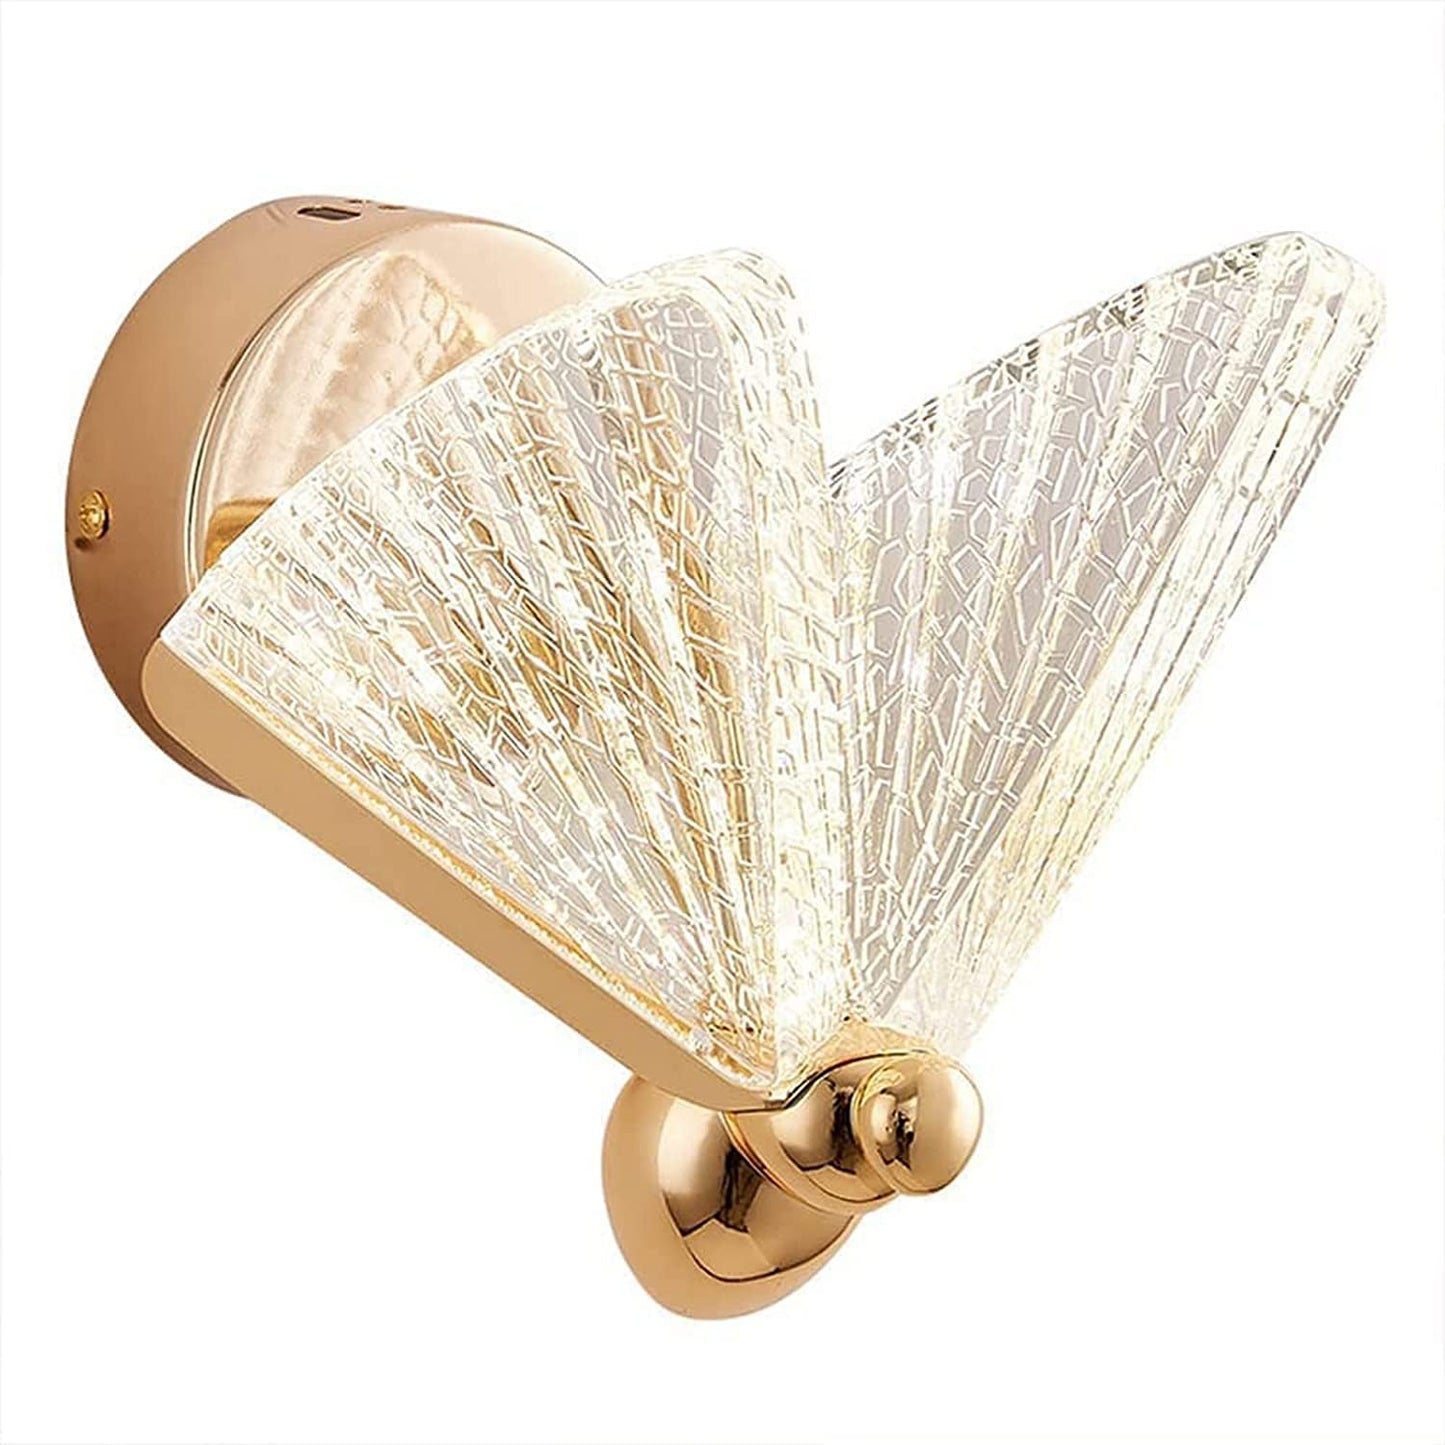 Butterfly Acrylic Led Wall Light by Gloss (DB0129A-1)